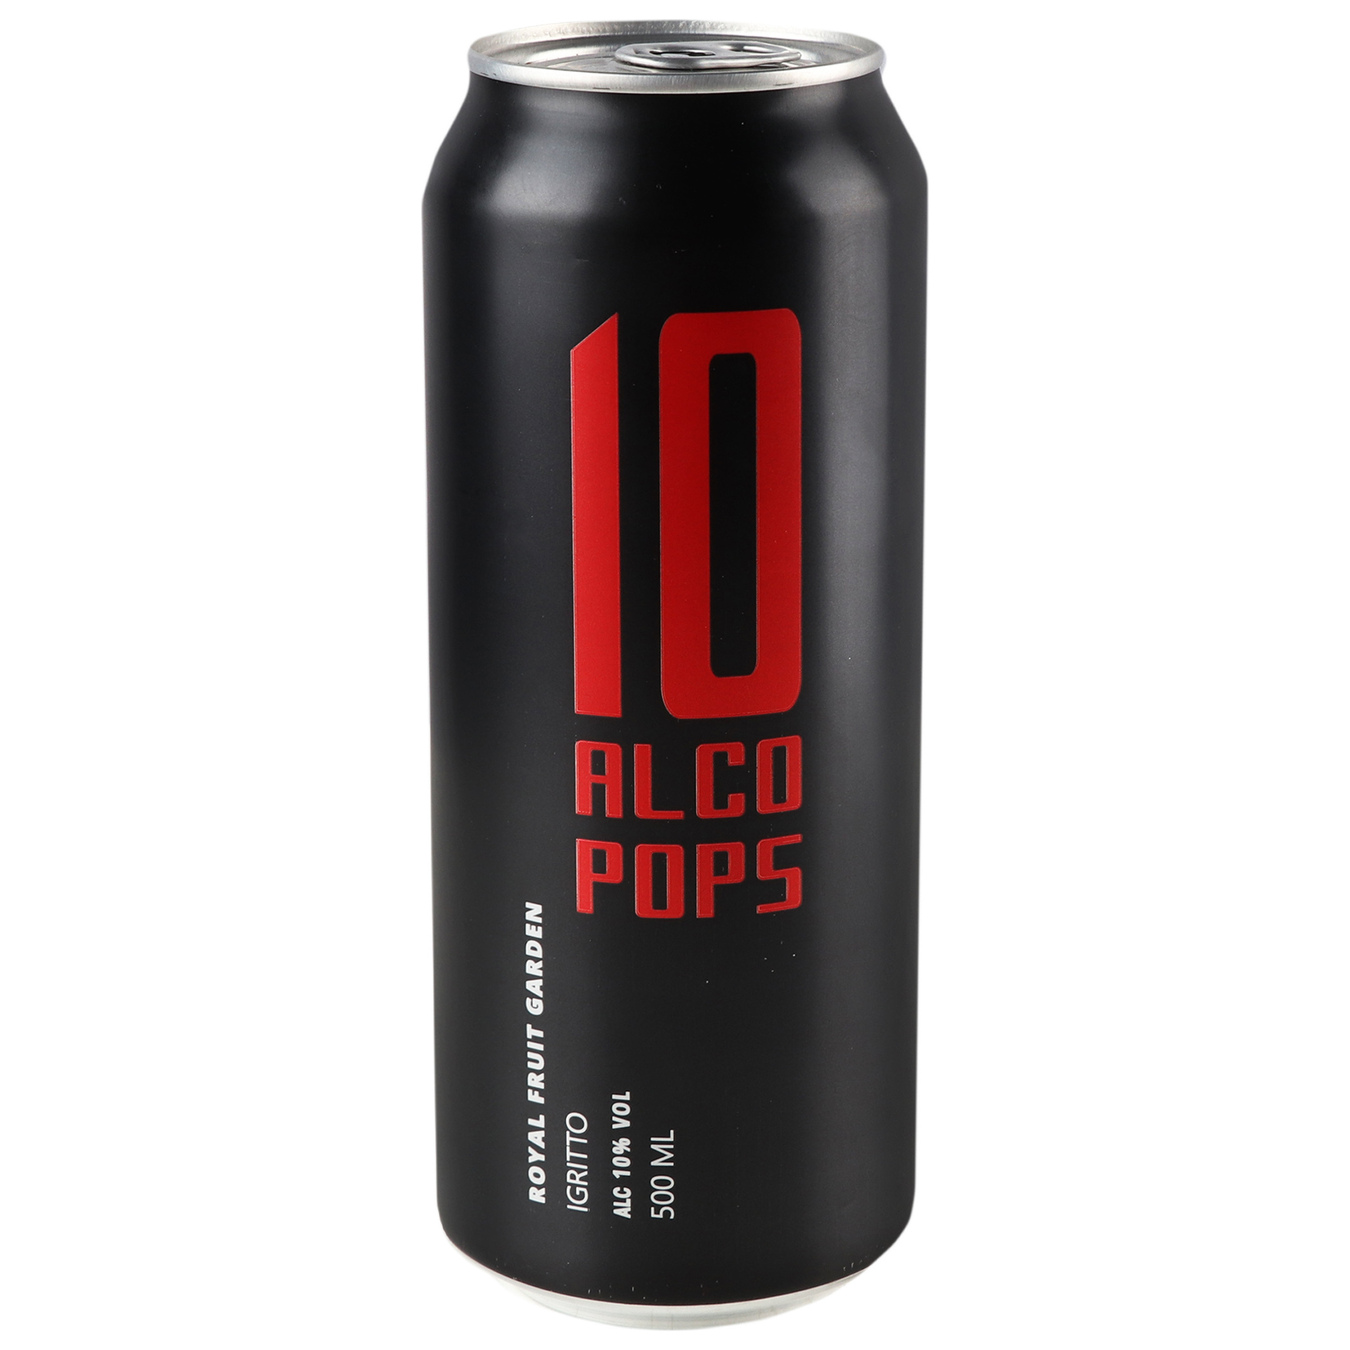 Fermented carbonated drink Alco Pops Igritto 10% 0.5 l iron can 4